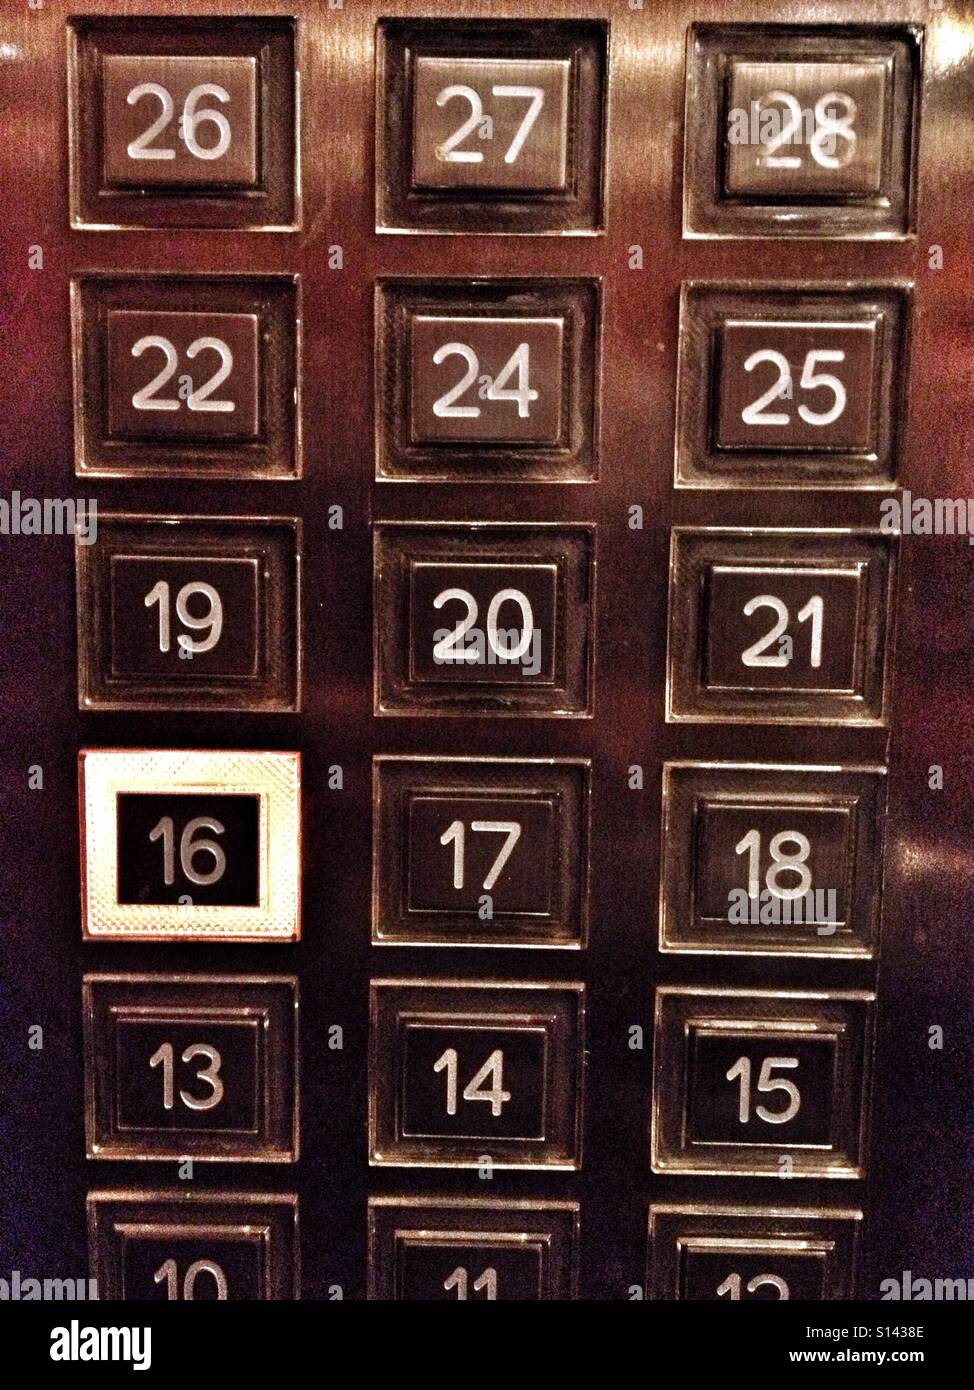 Elevator Panel Showing Floors 10 To 28 With Floor Number 16 Button Highlighted & Selected Stock Photo